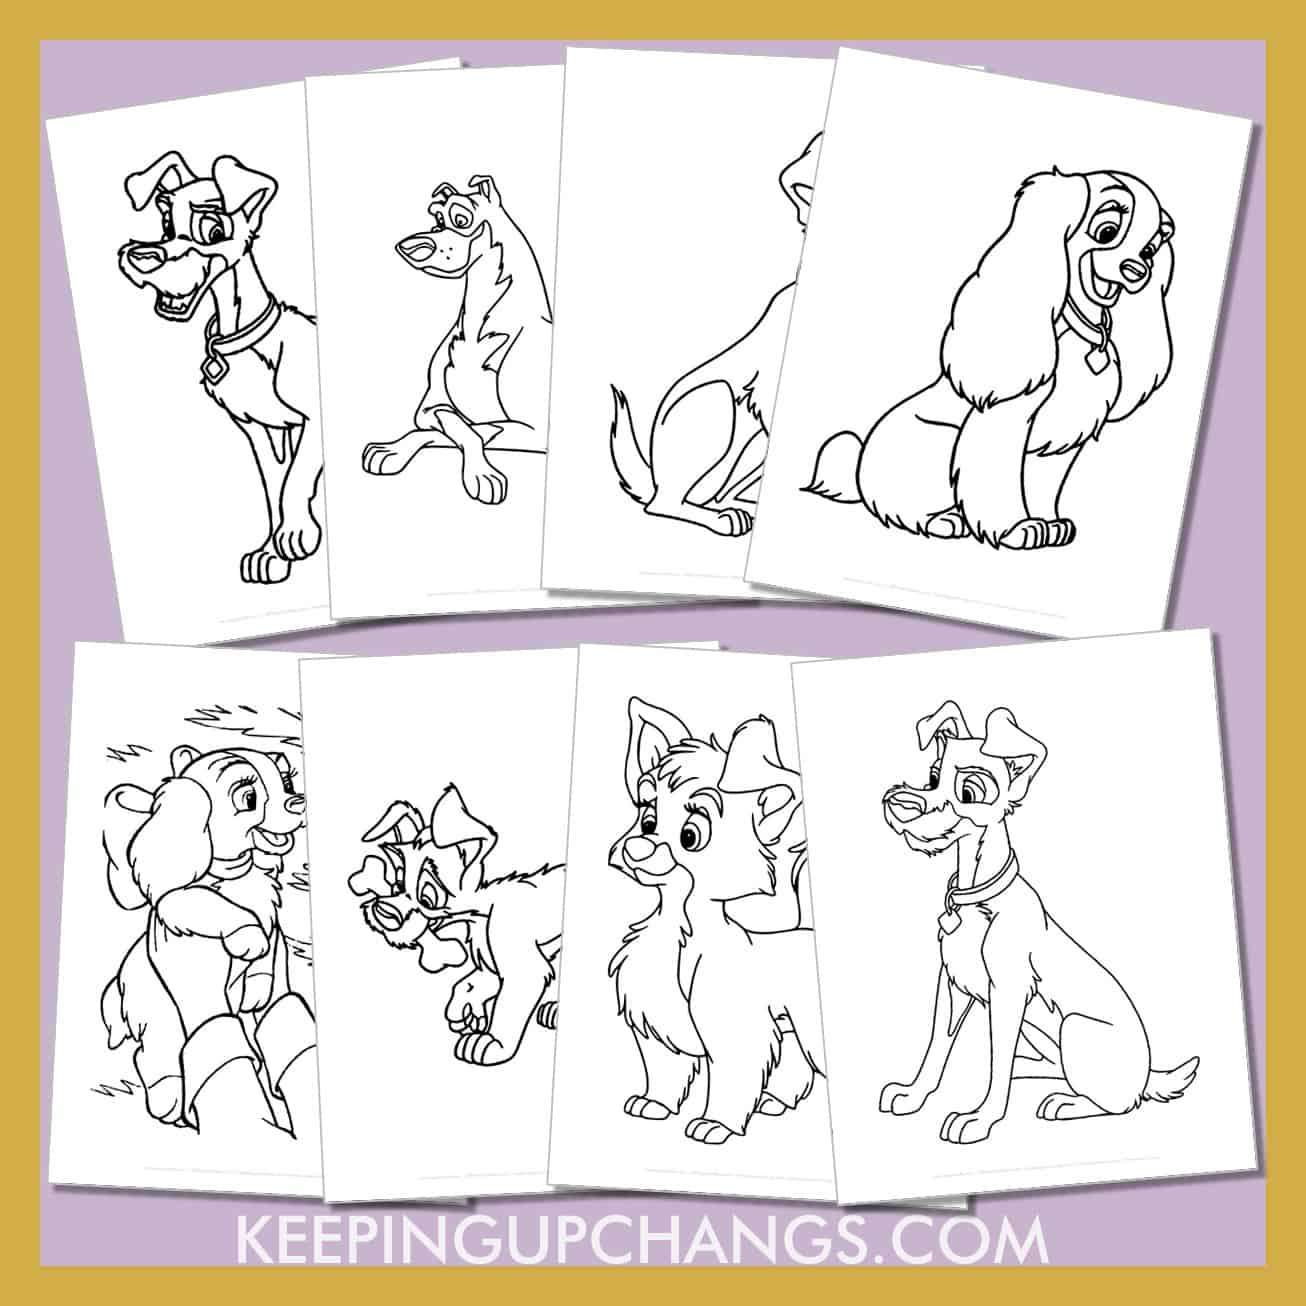 free lady and the tramp pictures to color for toddlers, kids, adults.